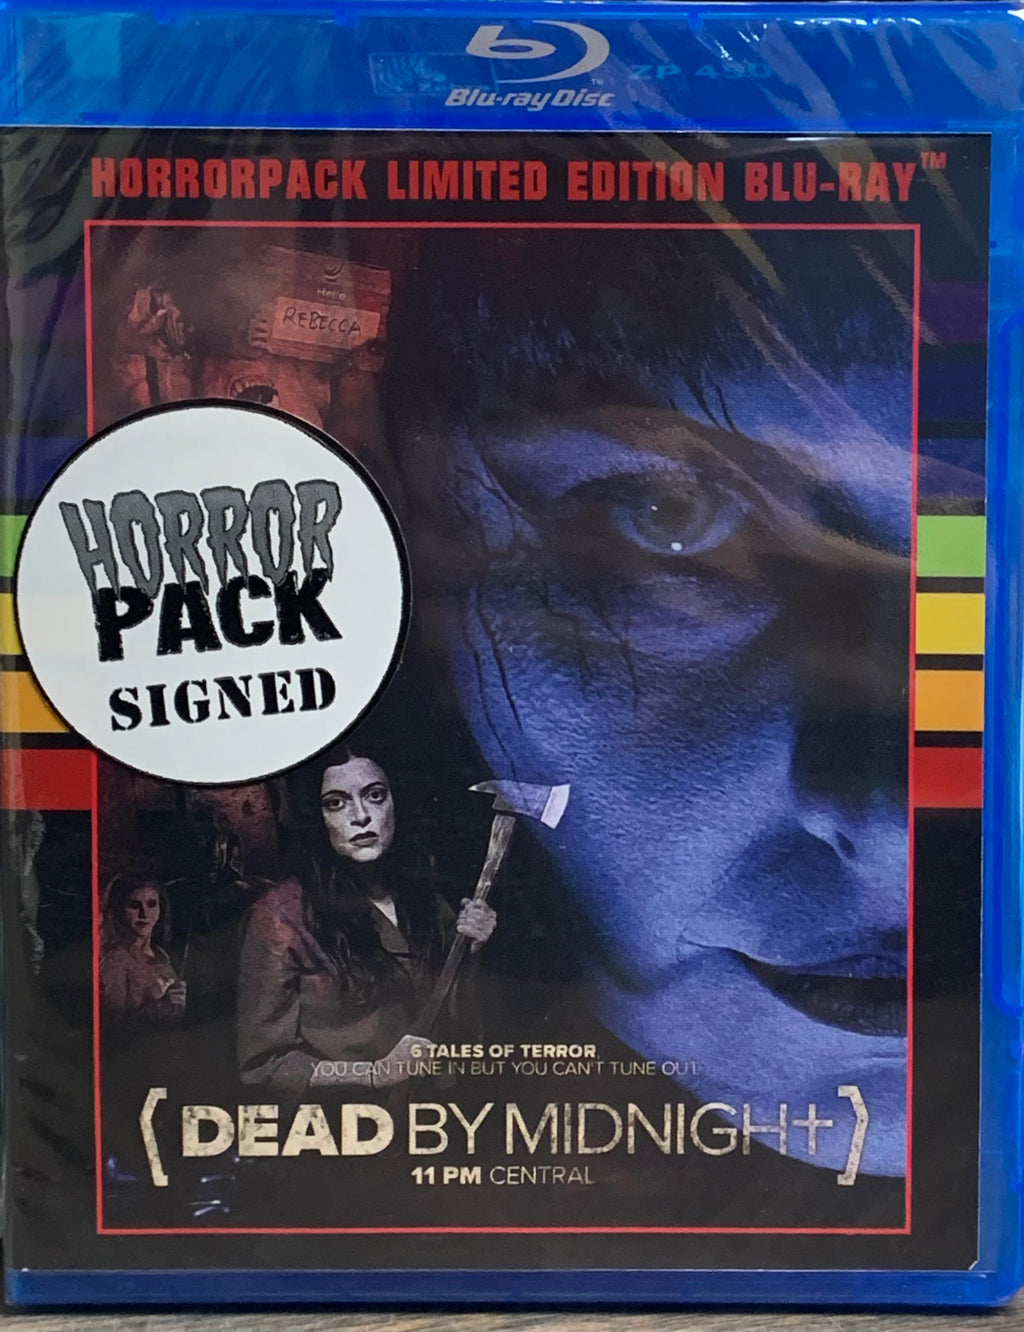 Dead by Midnight: 11pm Central - HorrorPack SIGNED Limited Edition Blu-ray #72